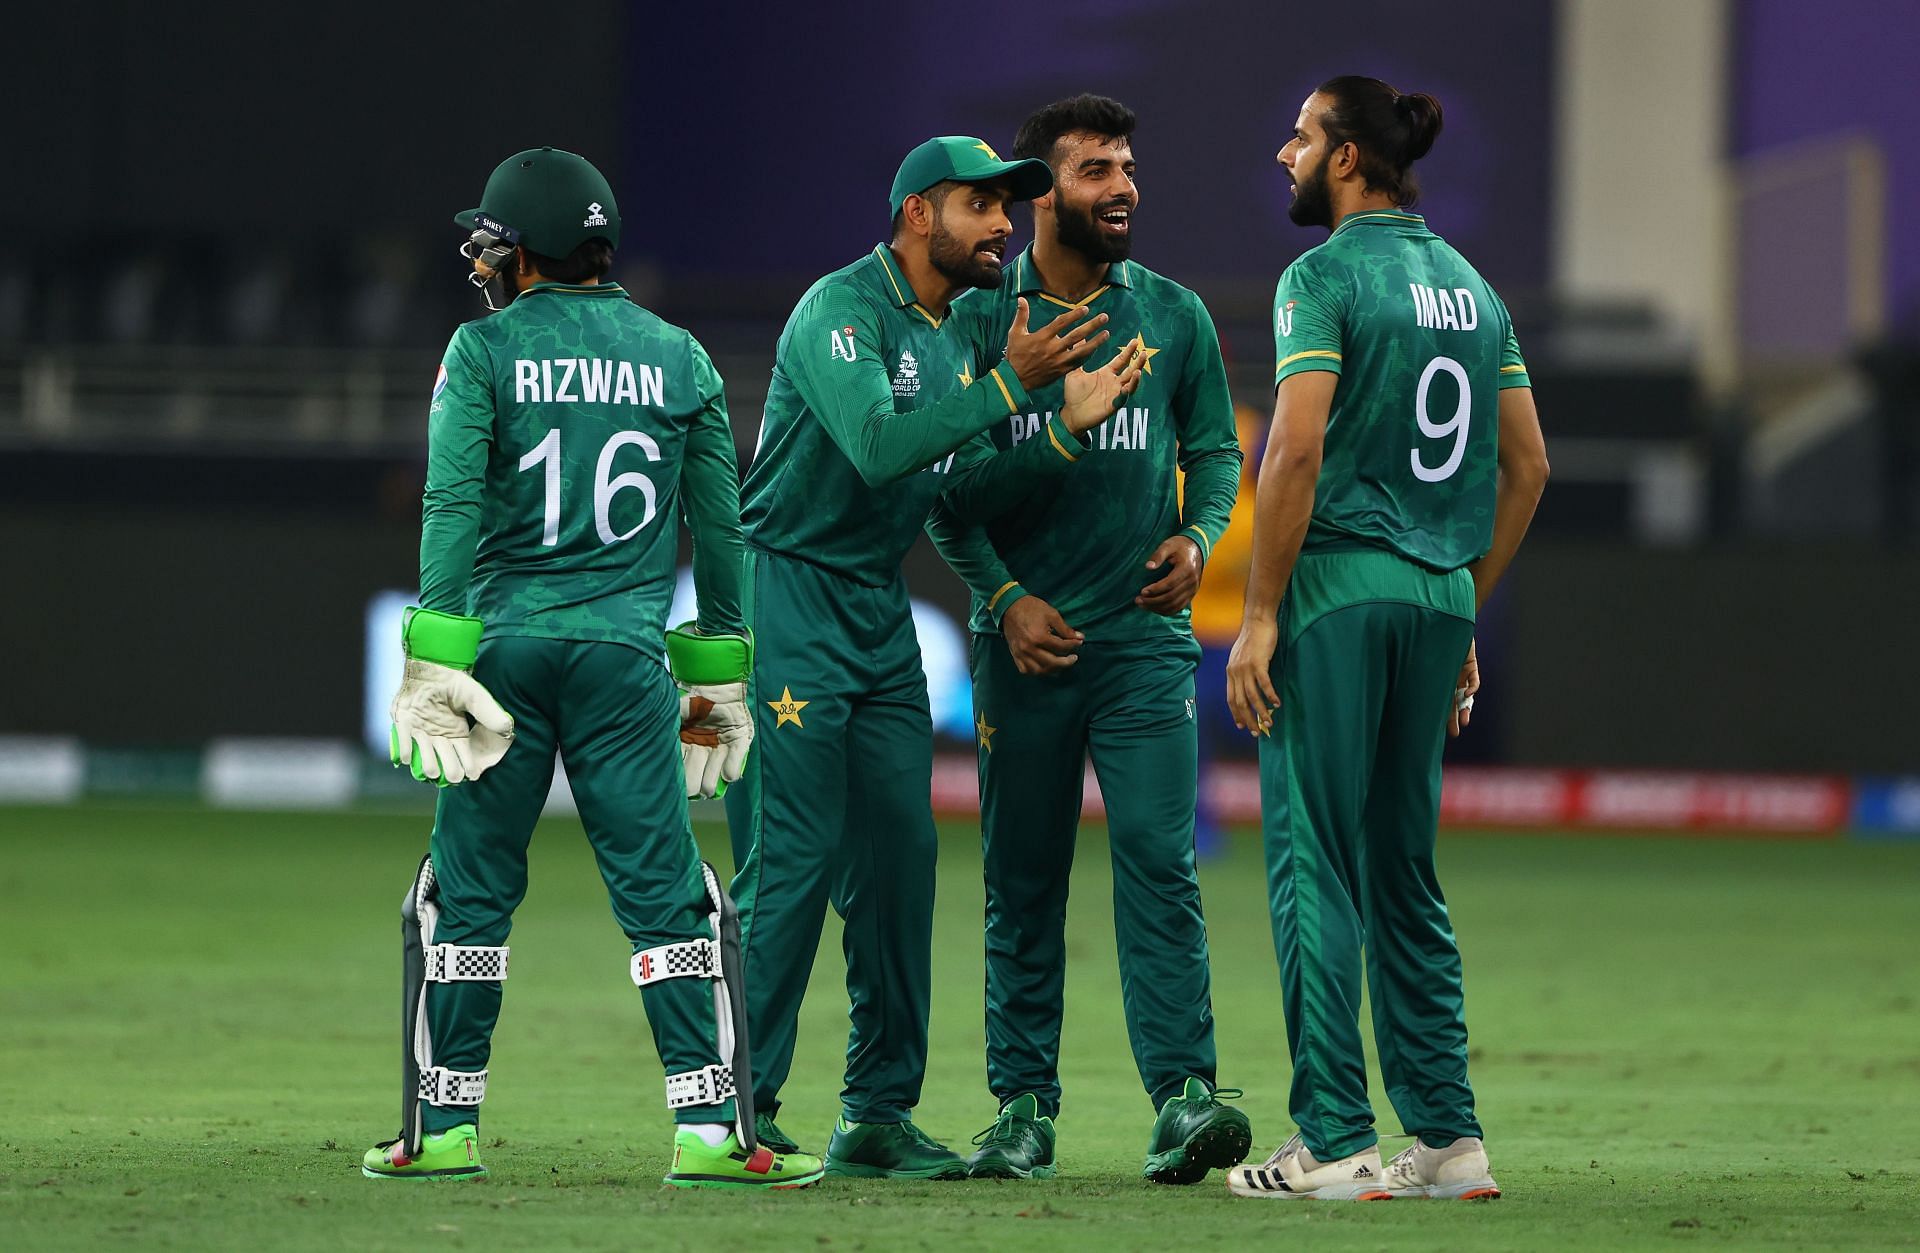 Pakistan cricket team. Pic: Getty Images